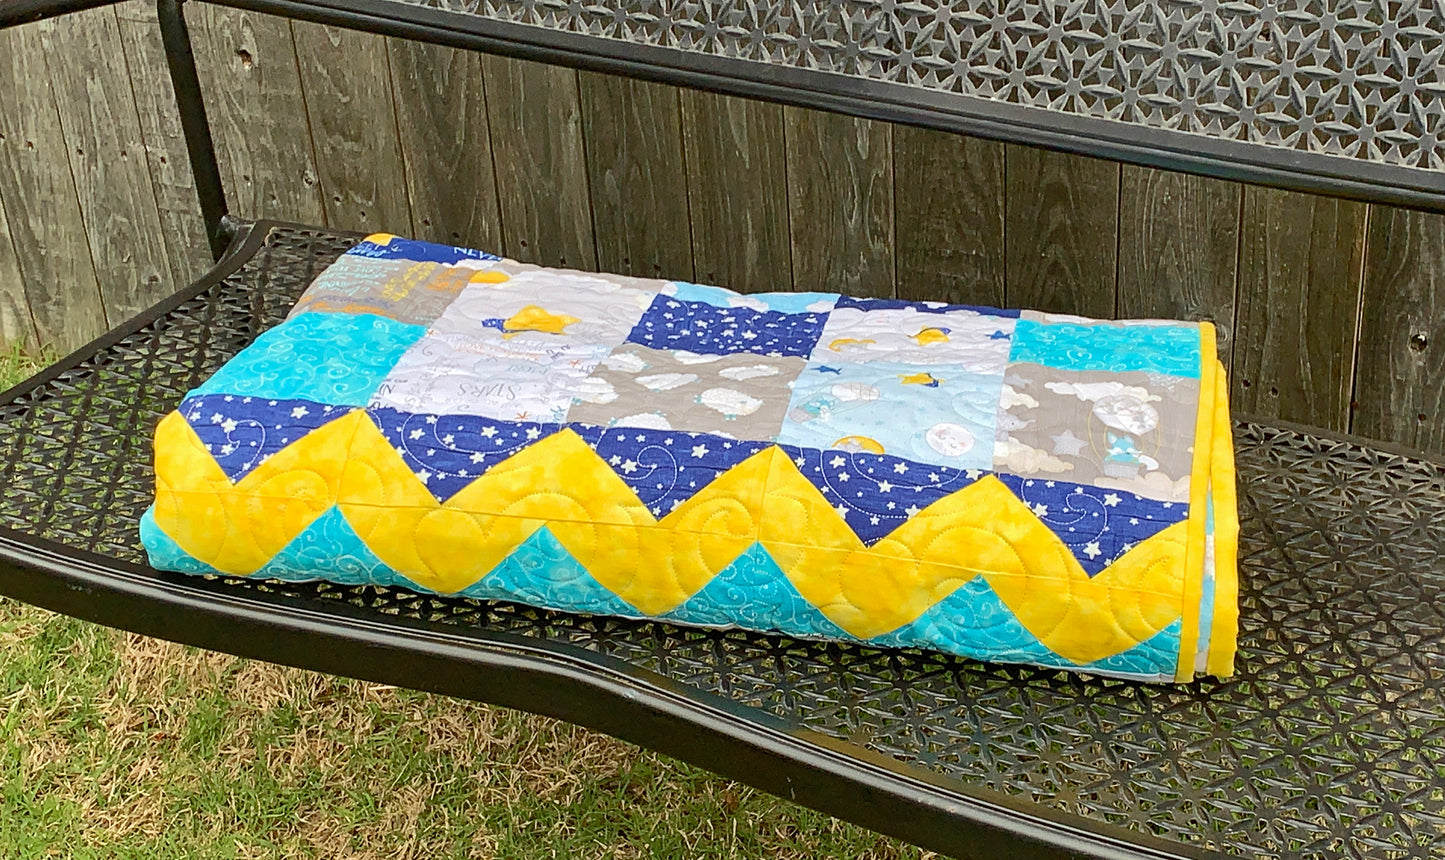 Blue, yellow, teal and gray patchwork baby or toddler quilt with four zig-zag rows accenting the patchwork blocks. Quilt is shown folded on a bench.